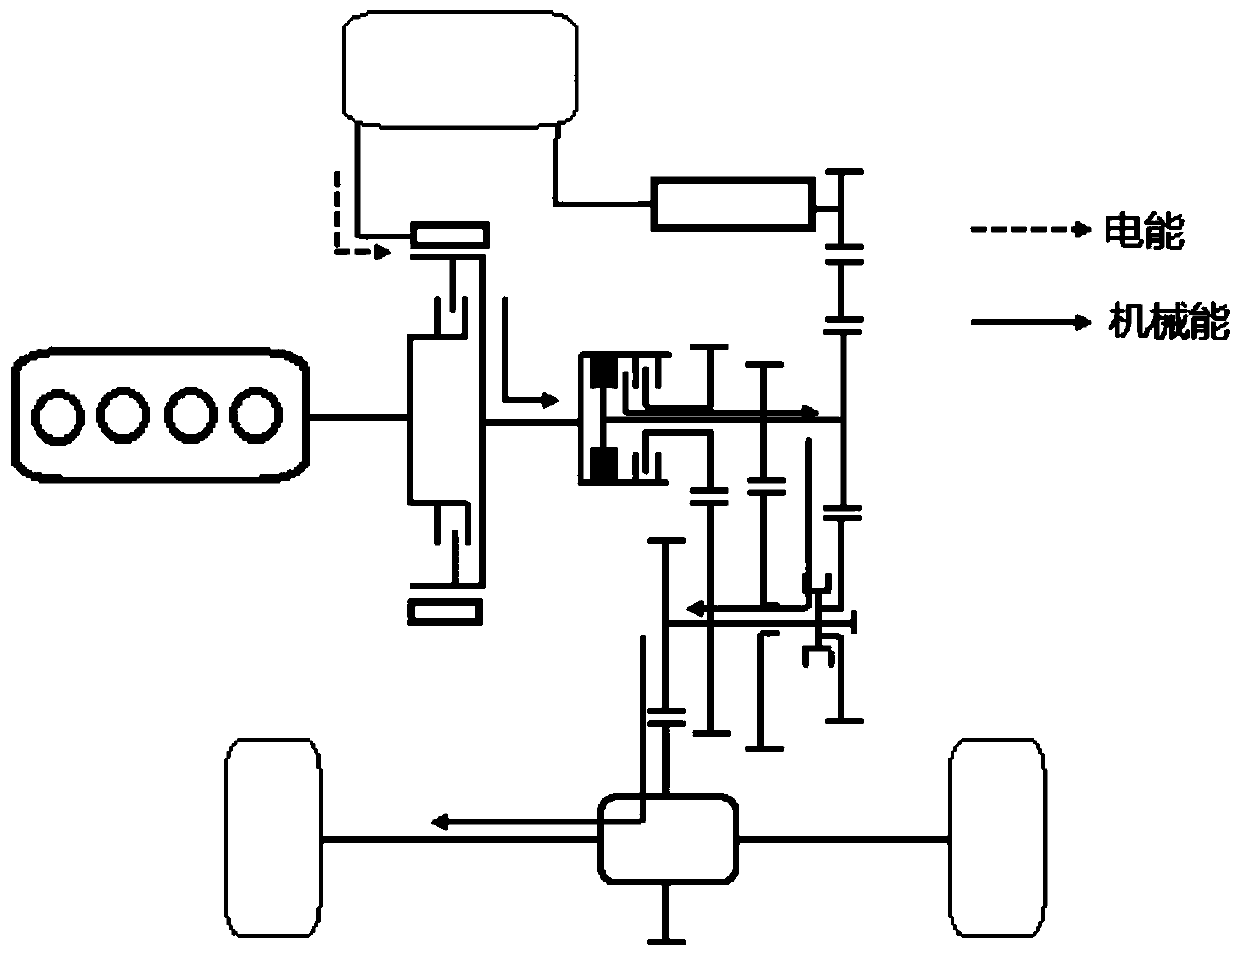 Variable-speed transmission system special for hybrid power automobile